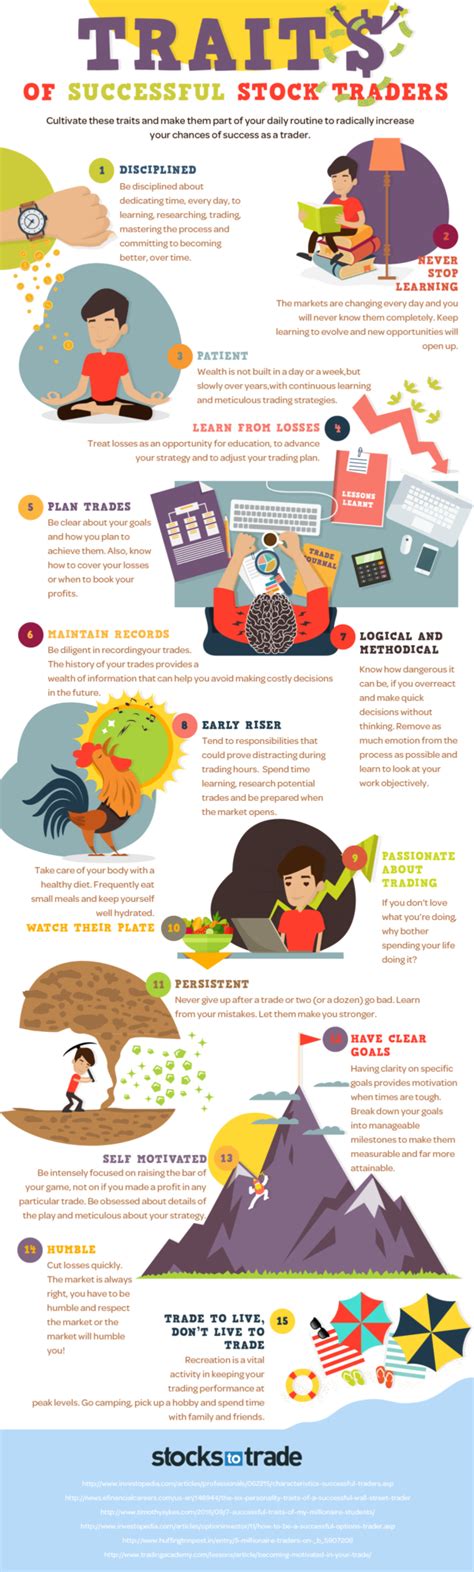 Traits Of Successful Stock Traders Infographic Stockstotrade